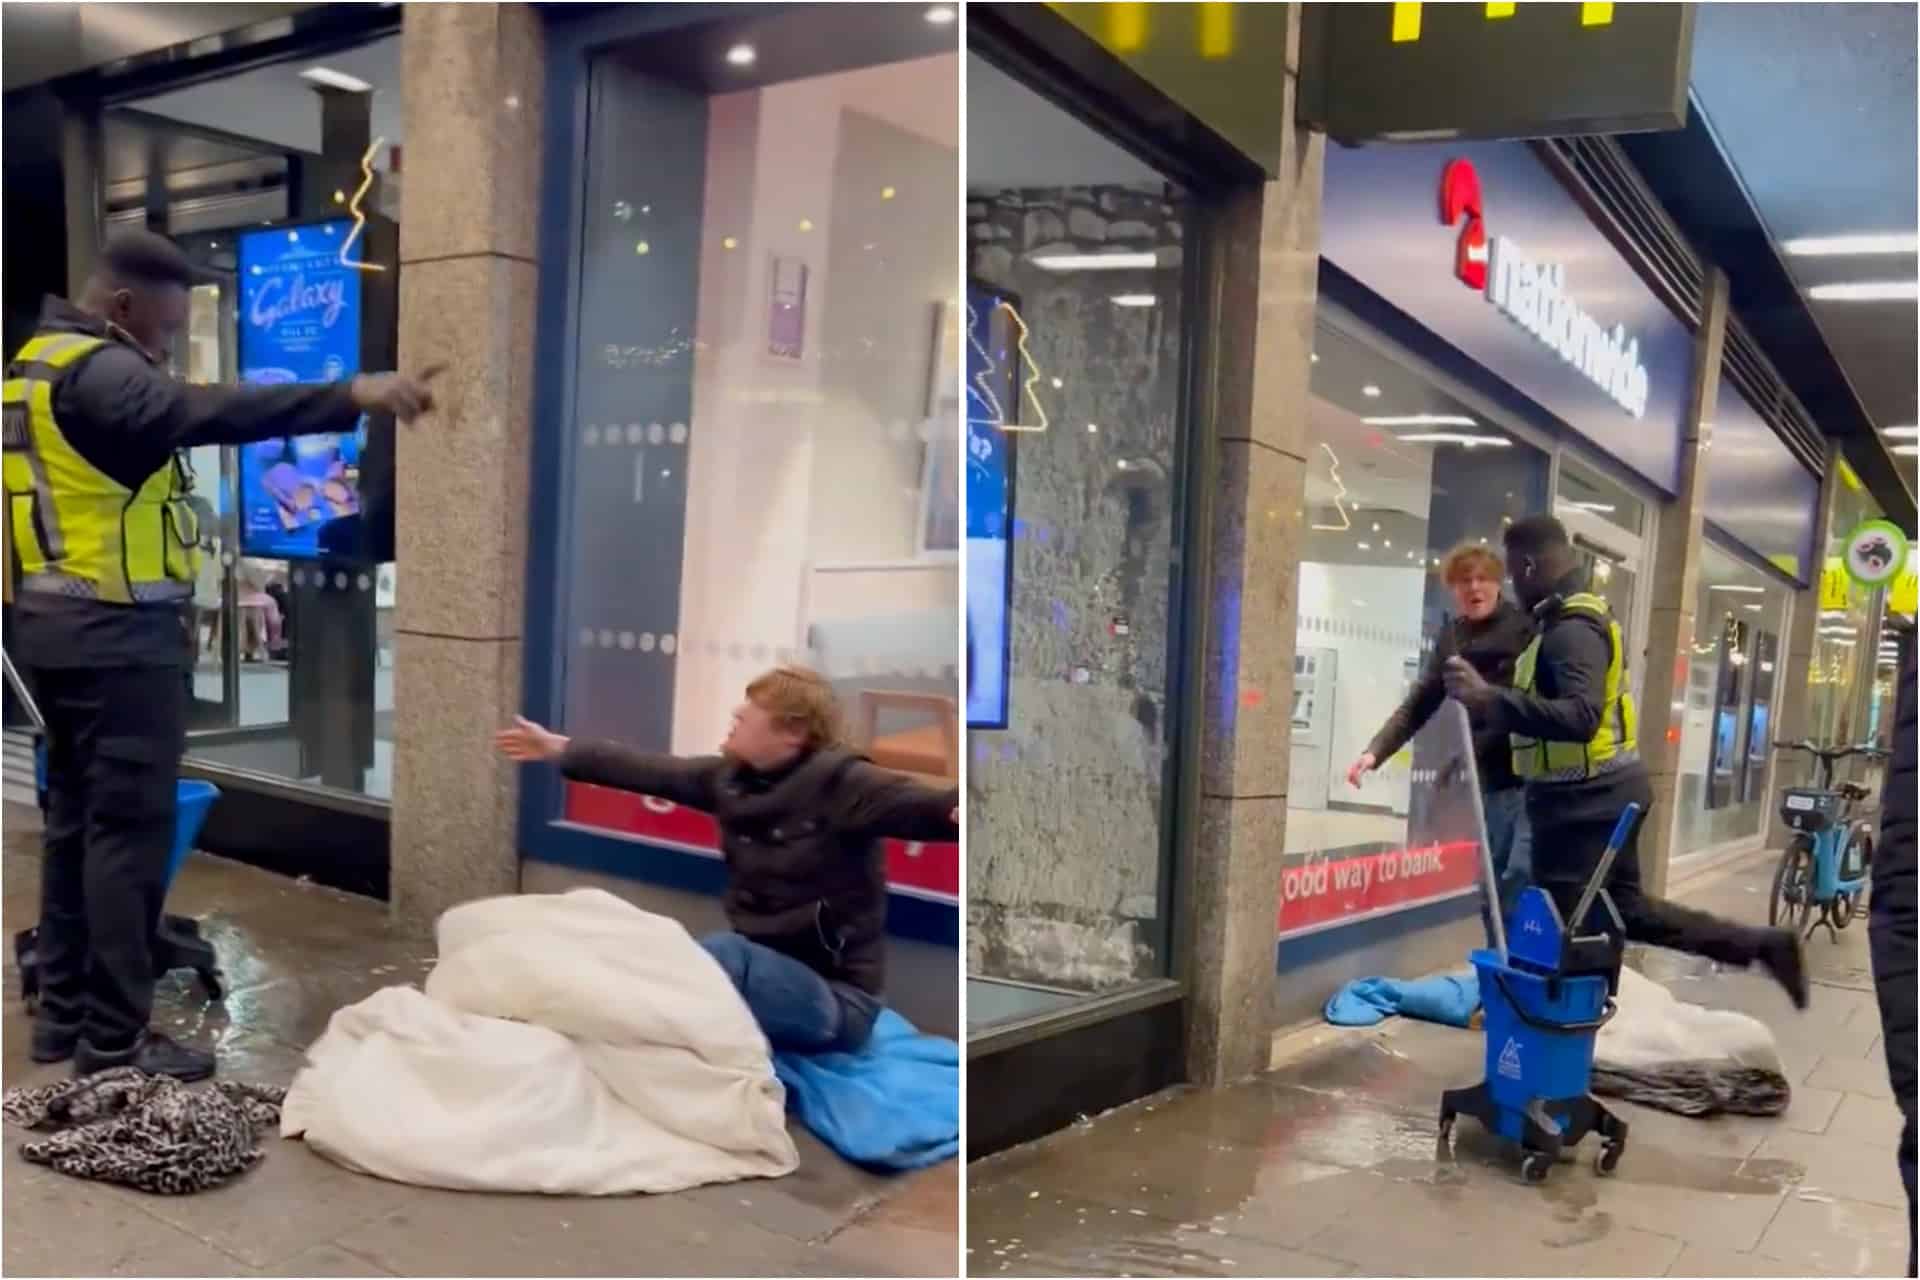 McDonald’s face calls to house rough sleeper drenched by security guards